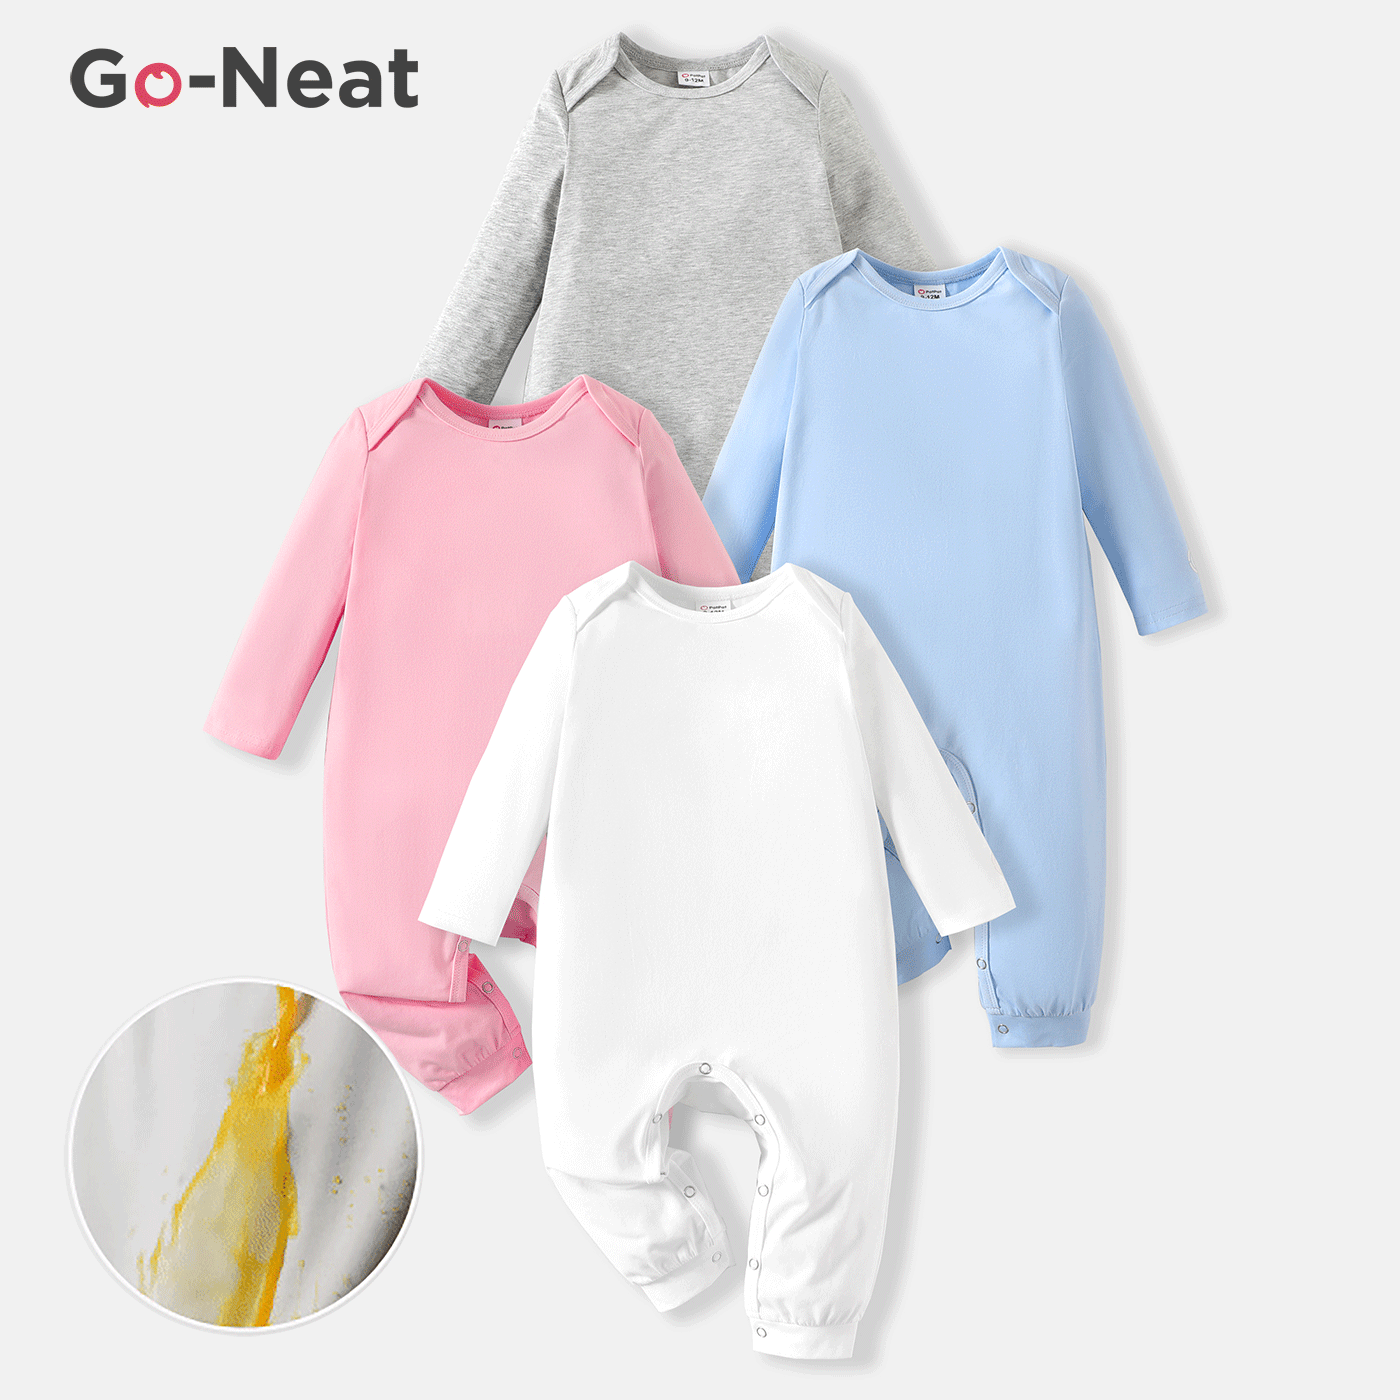 Buy Go-Neat Baby Clothes Online for Sale - PatPat US 1